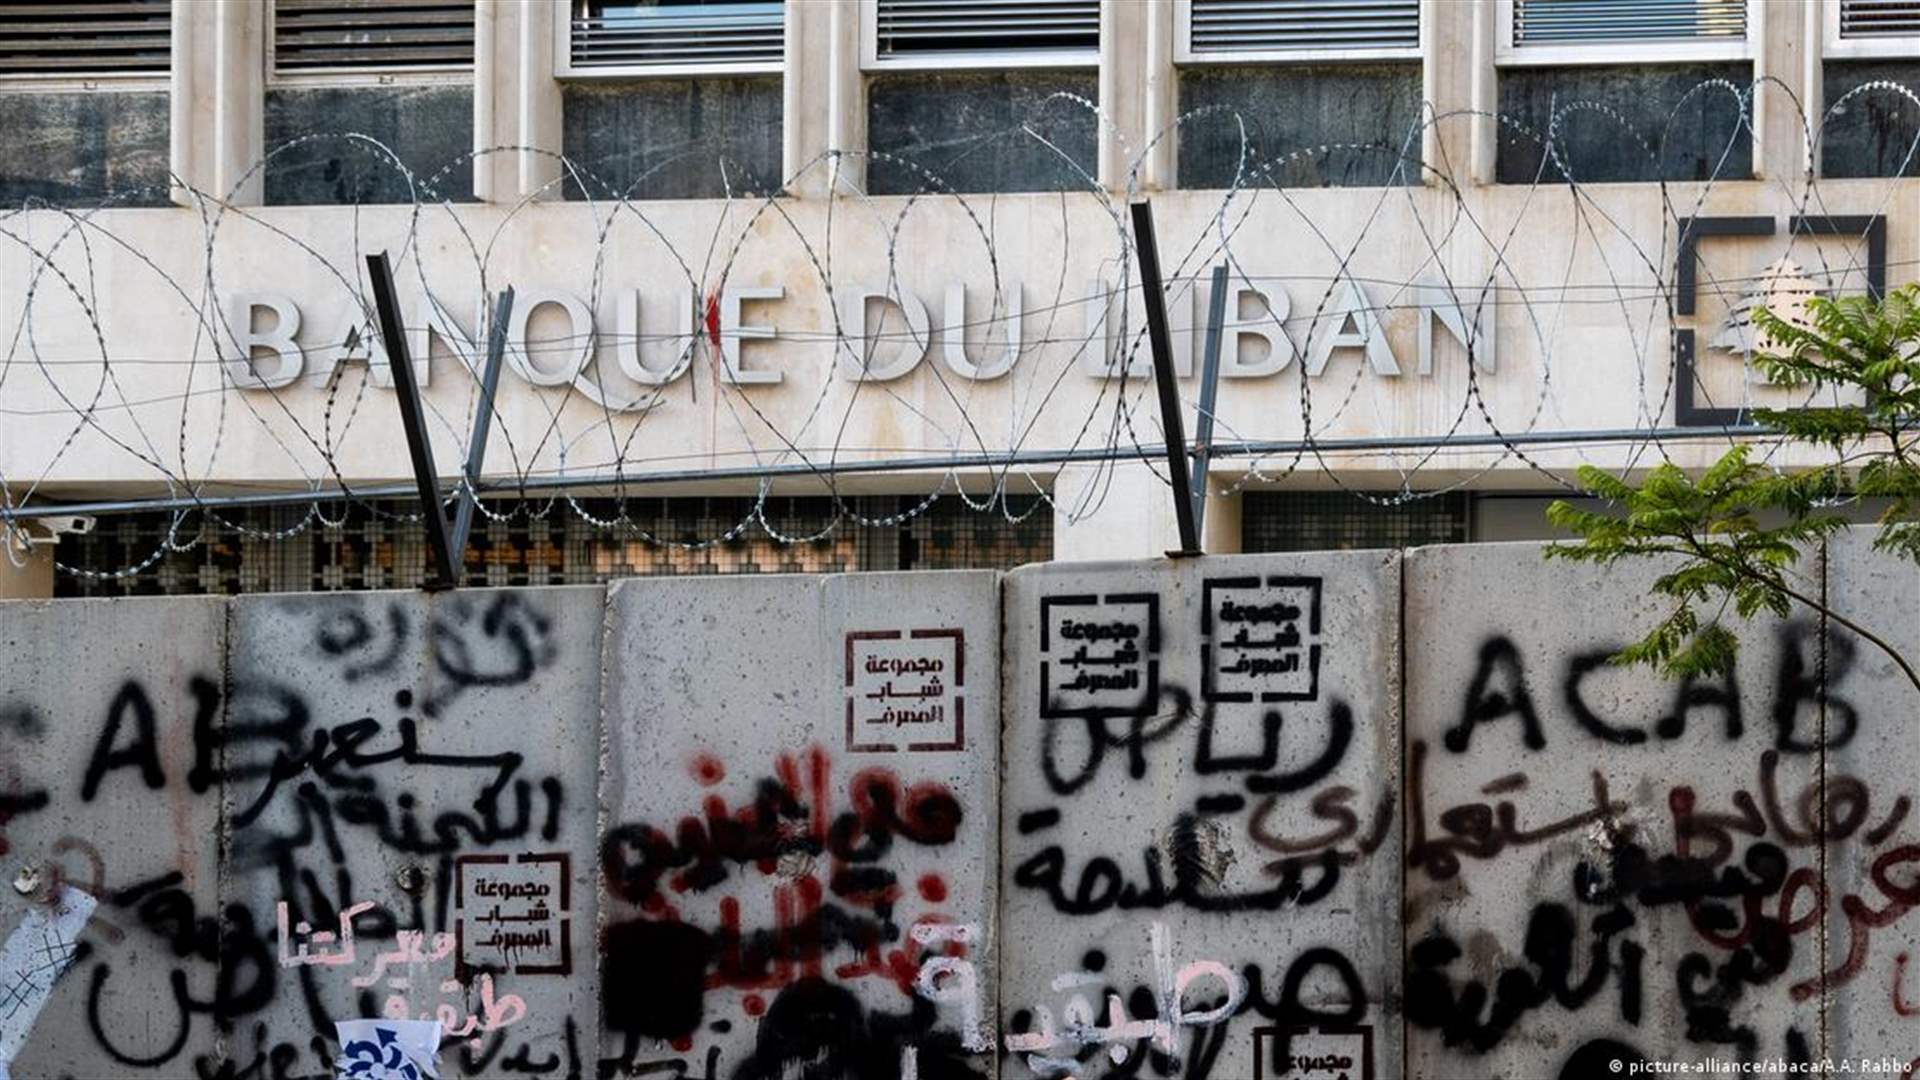 Lost reserves, vanished billions: The subsidy dilemma in Lebanon